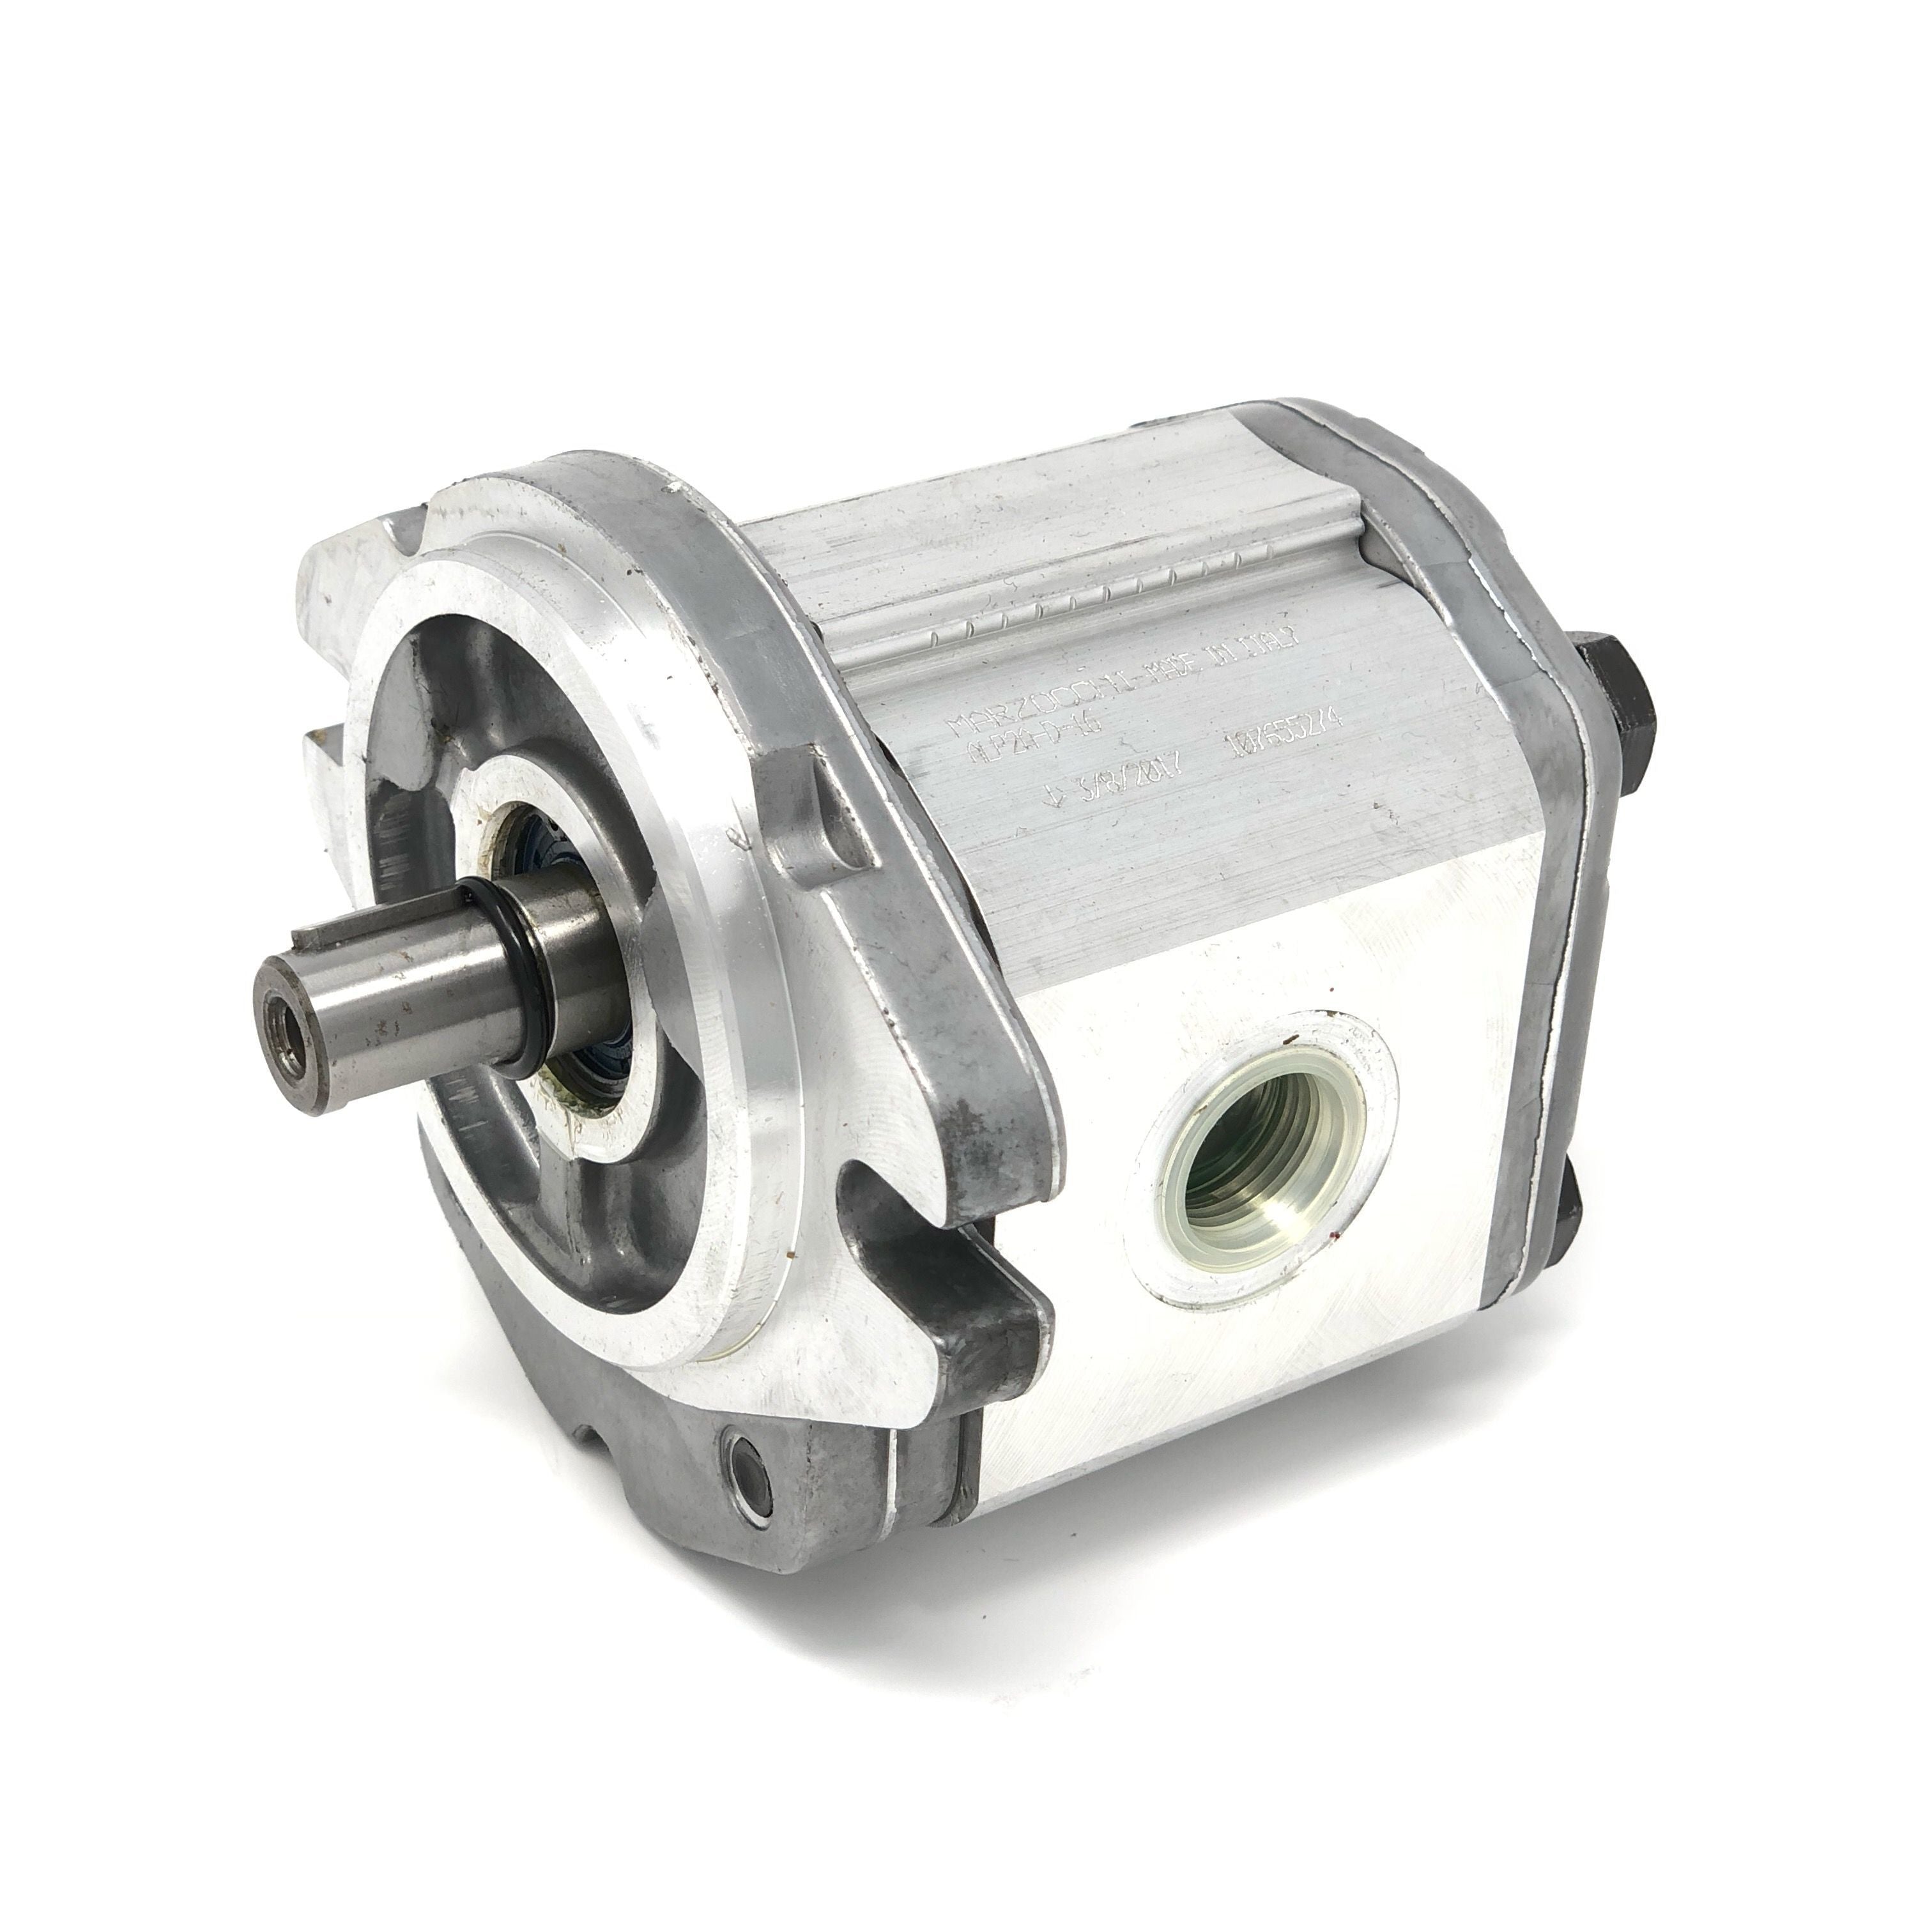 ALP2A-D-25 : Marzocchi Gear Pump, CW, 17.9cc (1.0919in3), 8.51 GPM, 3045psi, 2500 RPM, #12 SAE (3/4") In, #10 SAE (5/8") Out, Keyed Shaft 5/8" Bore x 5/32" Key, SAE A 2-Bolt Mount